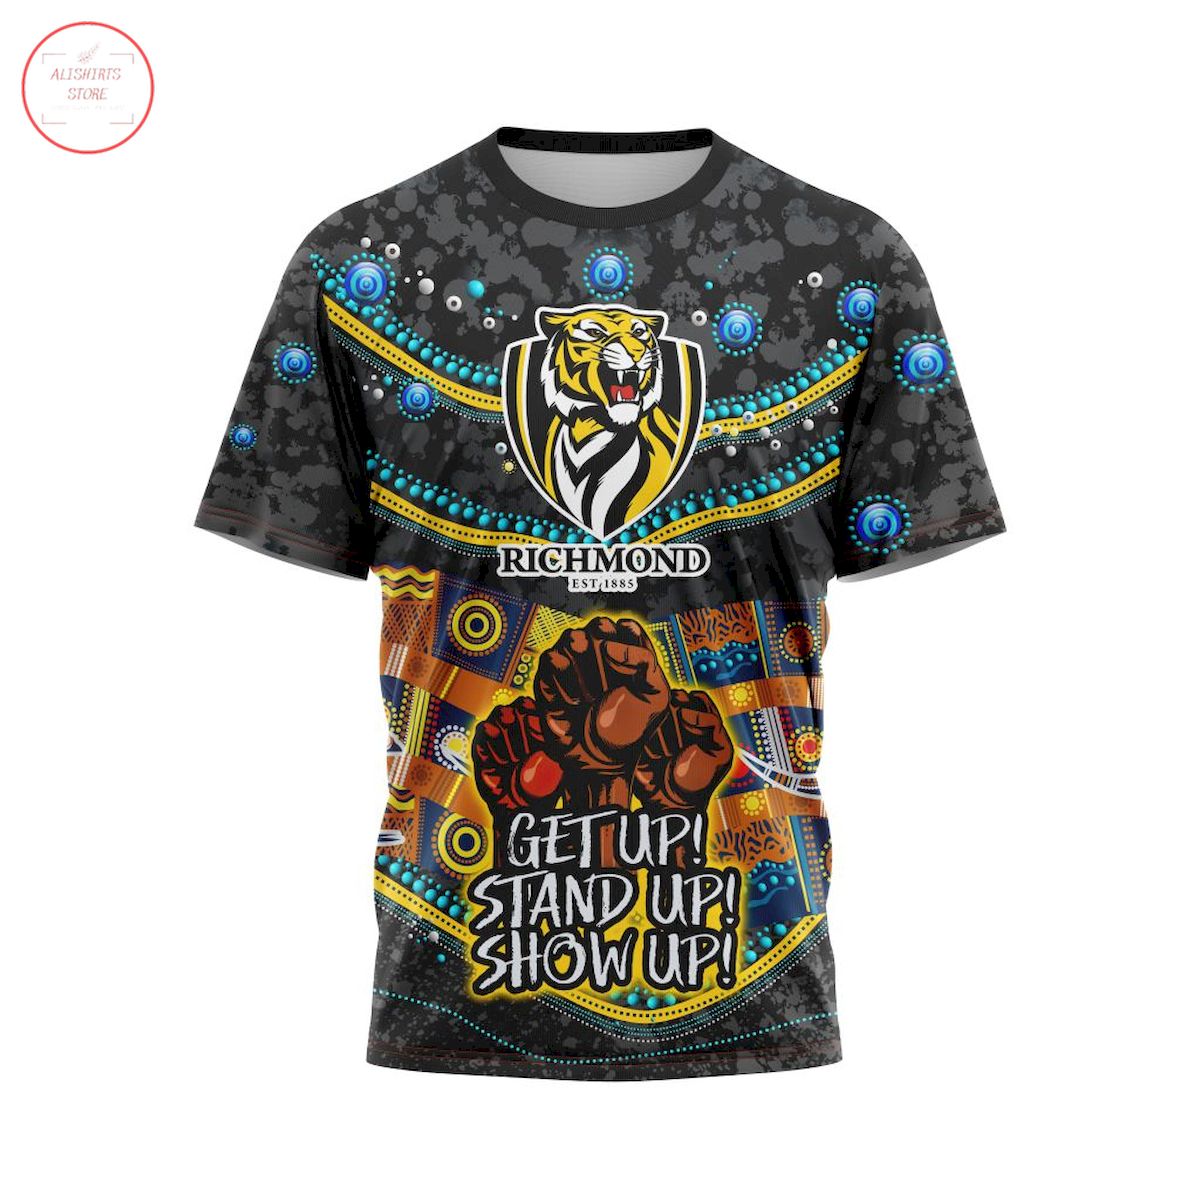 AFL Richmond Tigers Customized All Over Printed Shirts